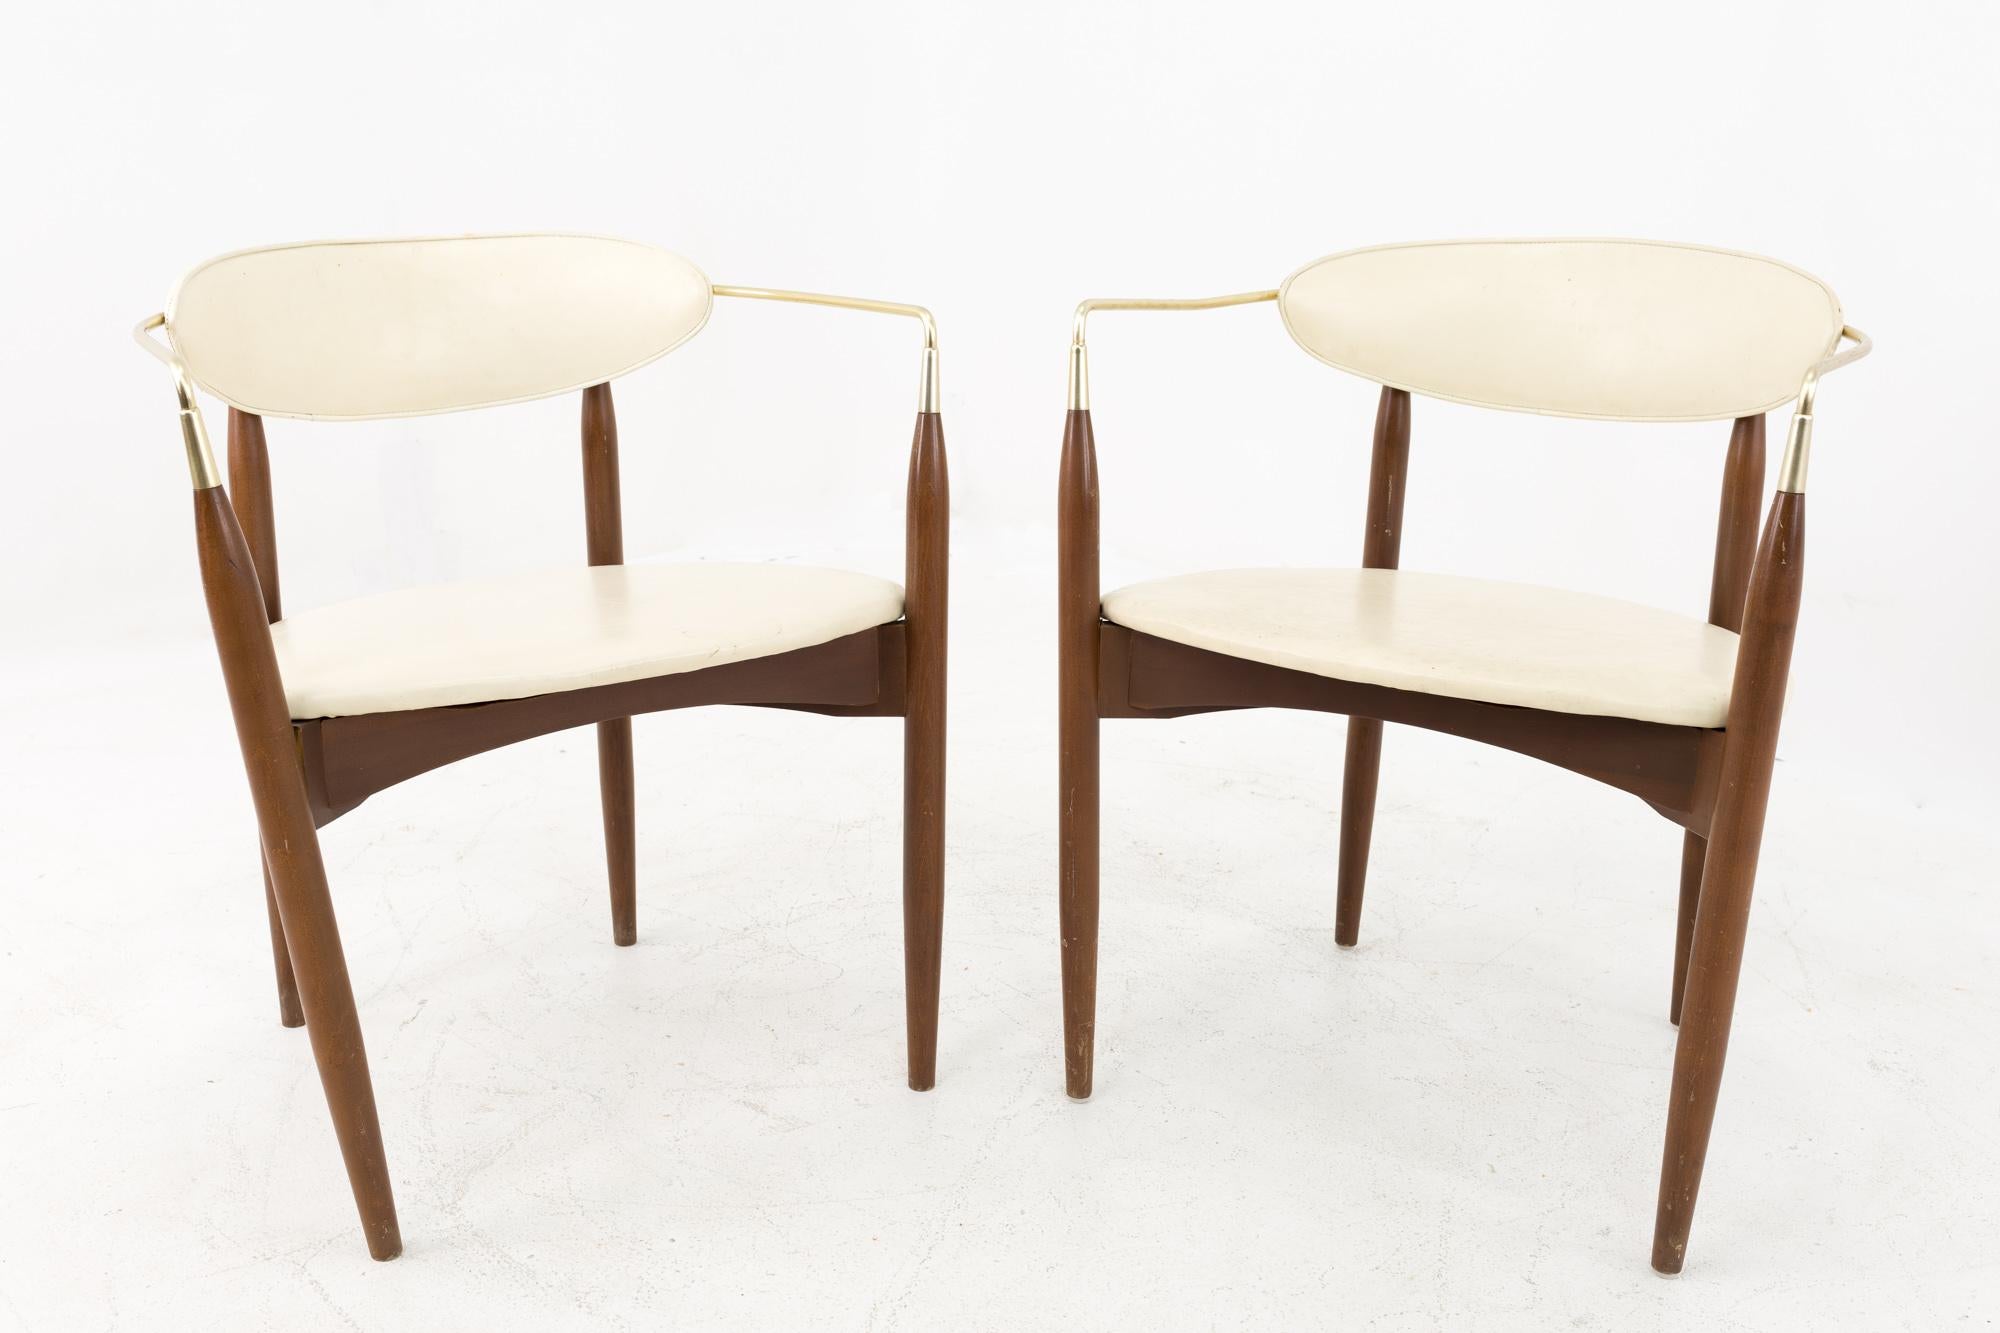 Dan Johnson for Selig Viscount midcentury walnut and brass dining chairs - pair.
Each chair measures 23 wide x 21 deep x 28 inches high.

All pieces of furniture can be had in what we call restored vintage condition. This means the piece is